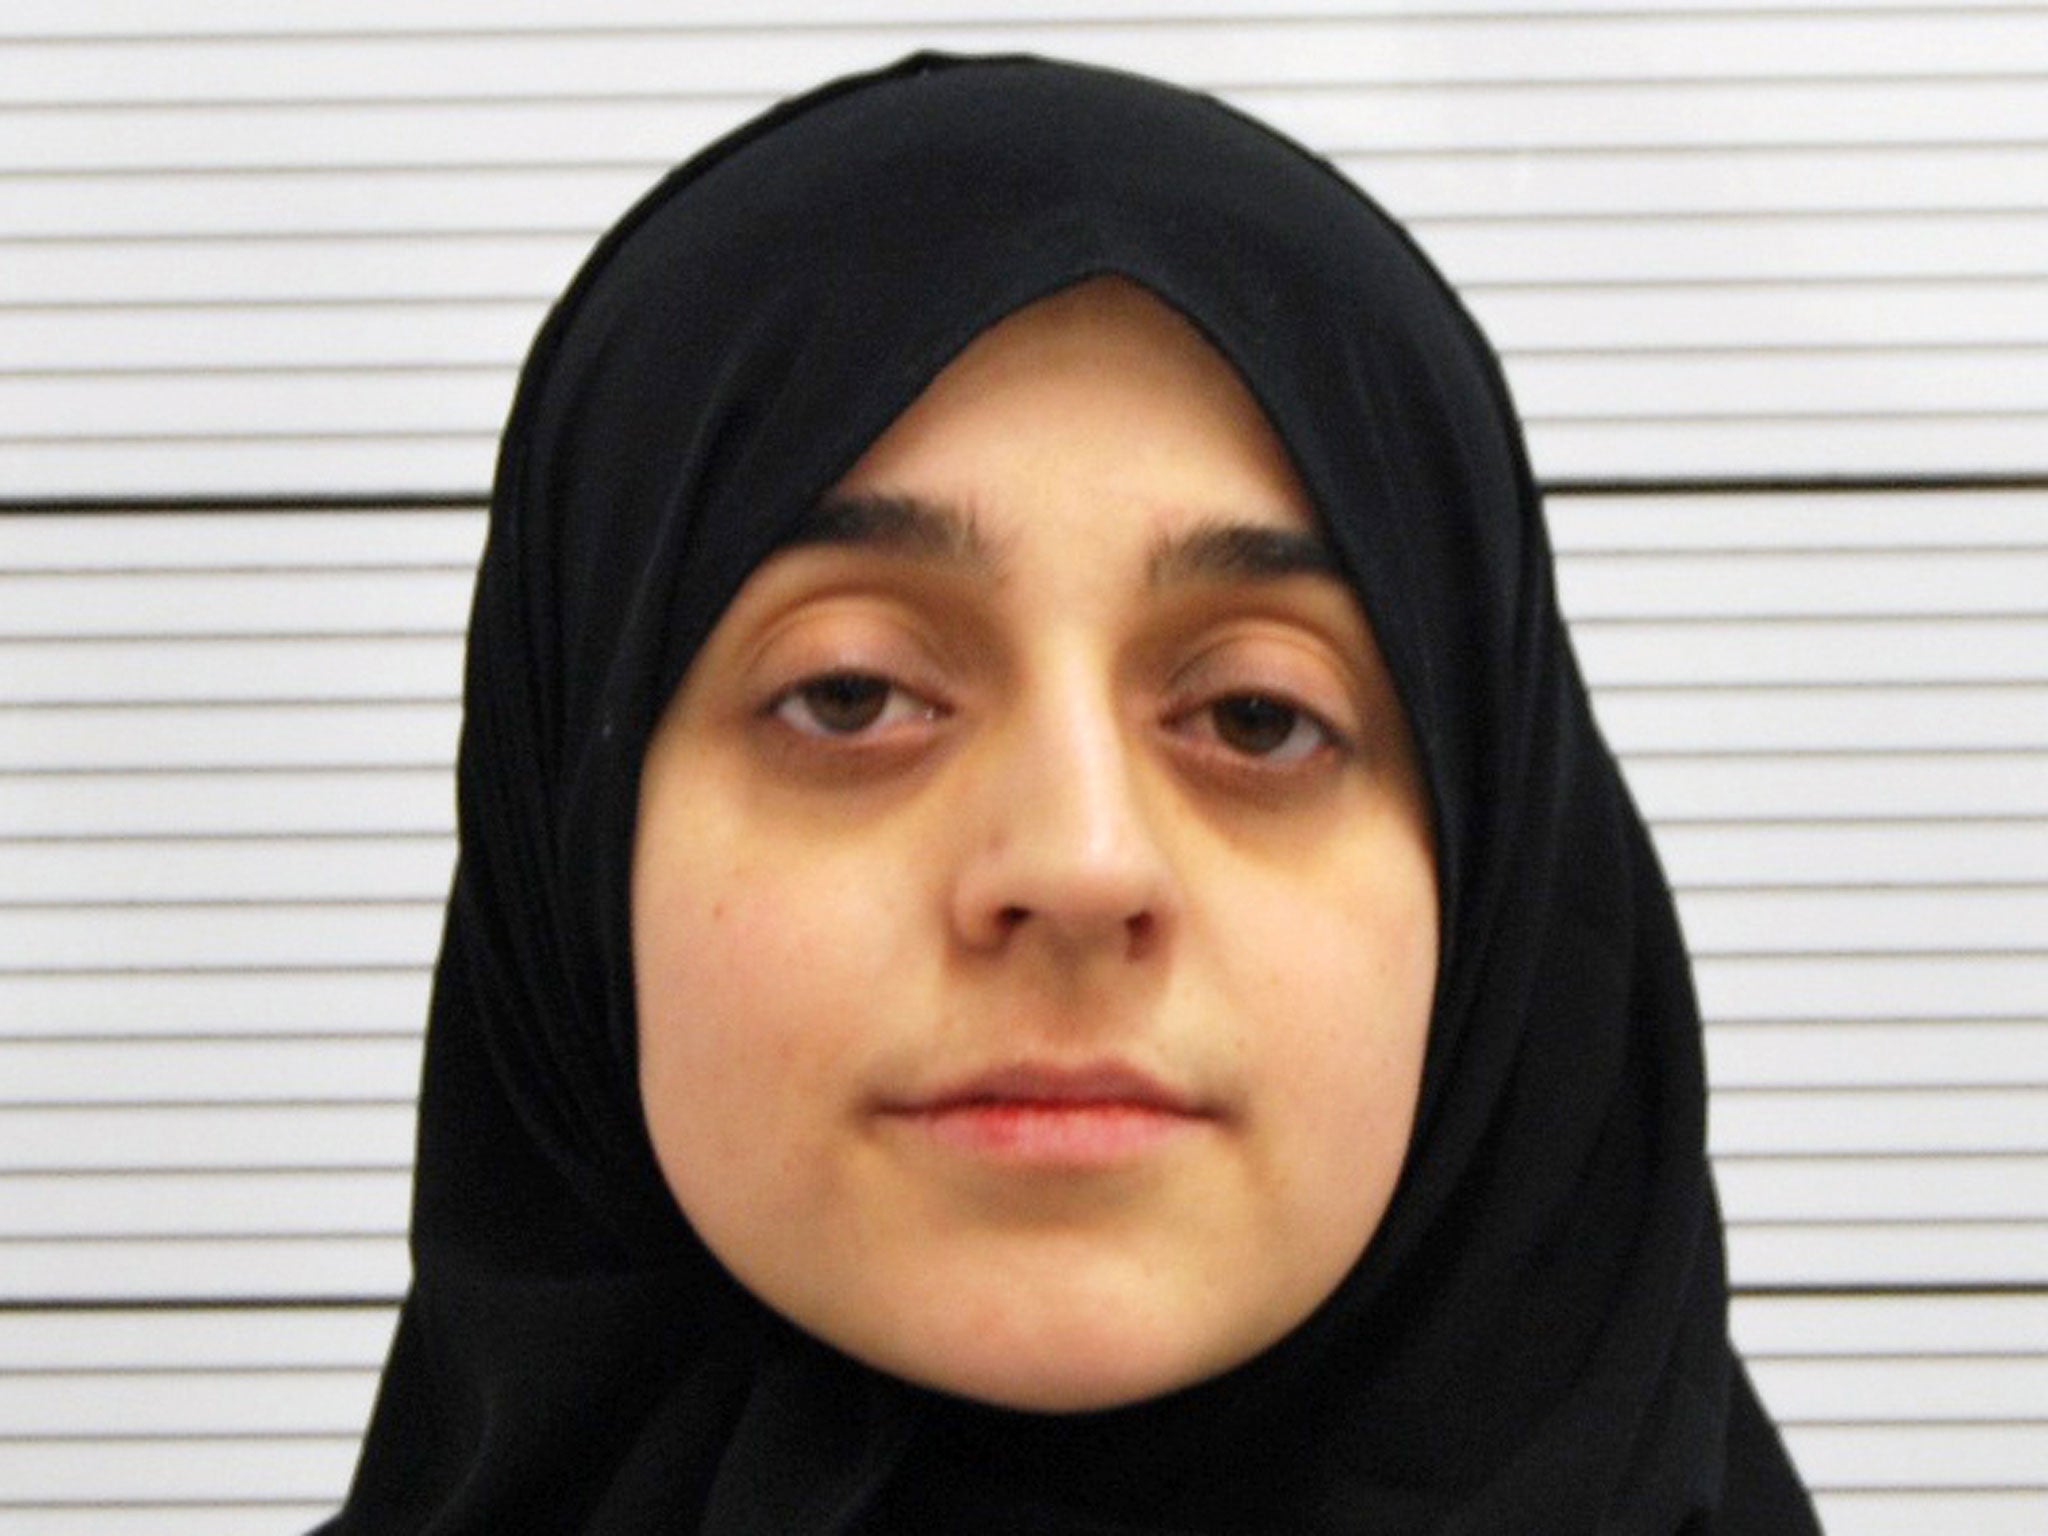 Tareena Shakil was jailed for six years and served half her sentence